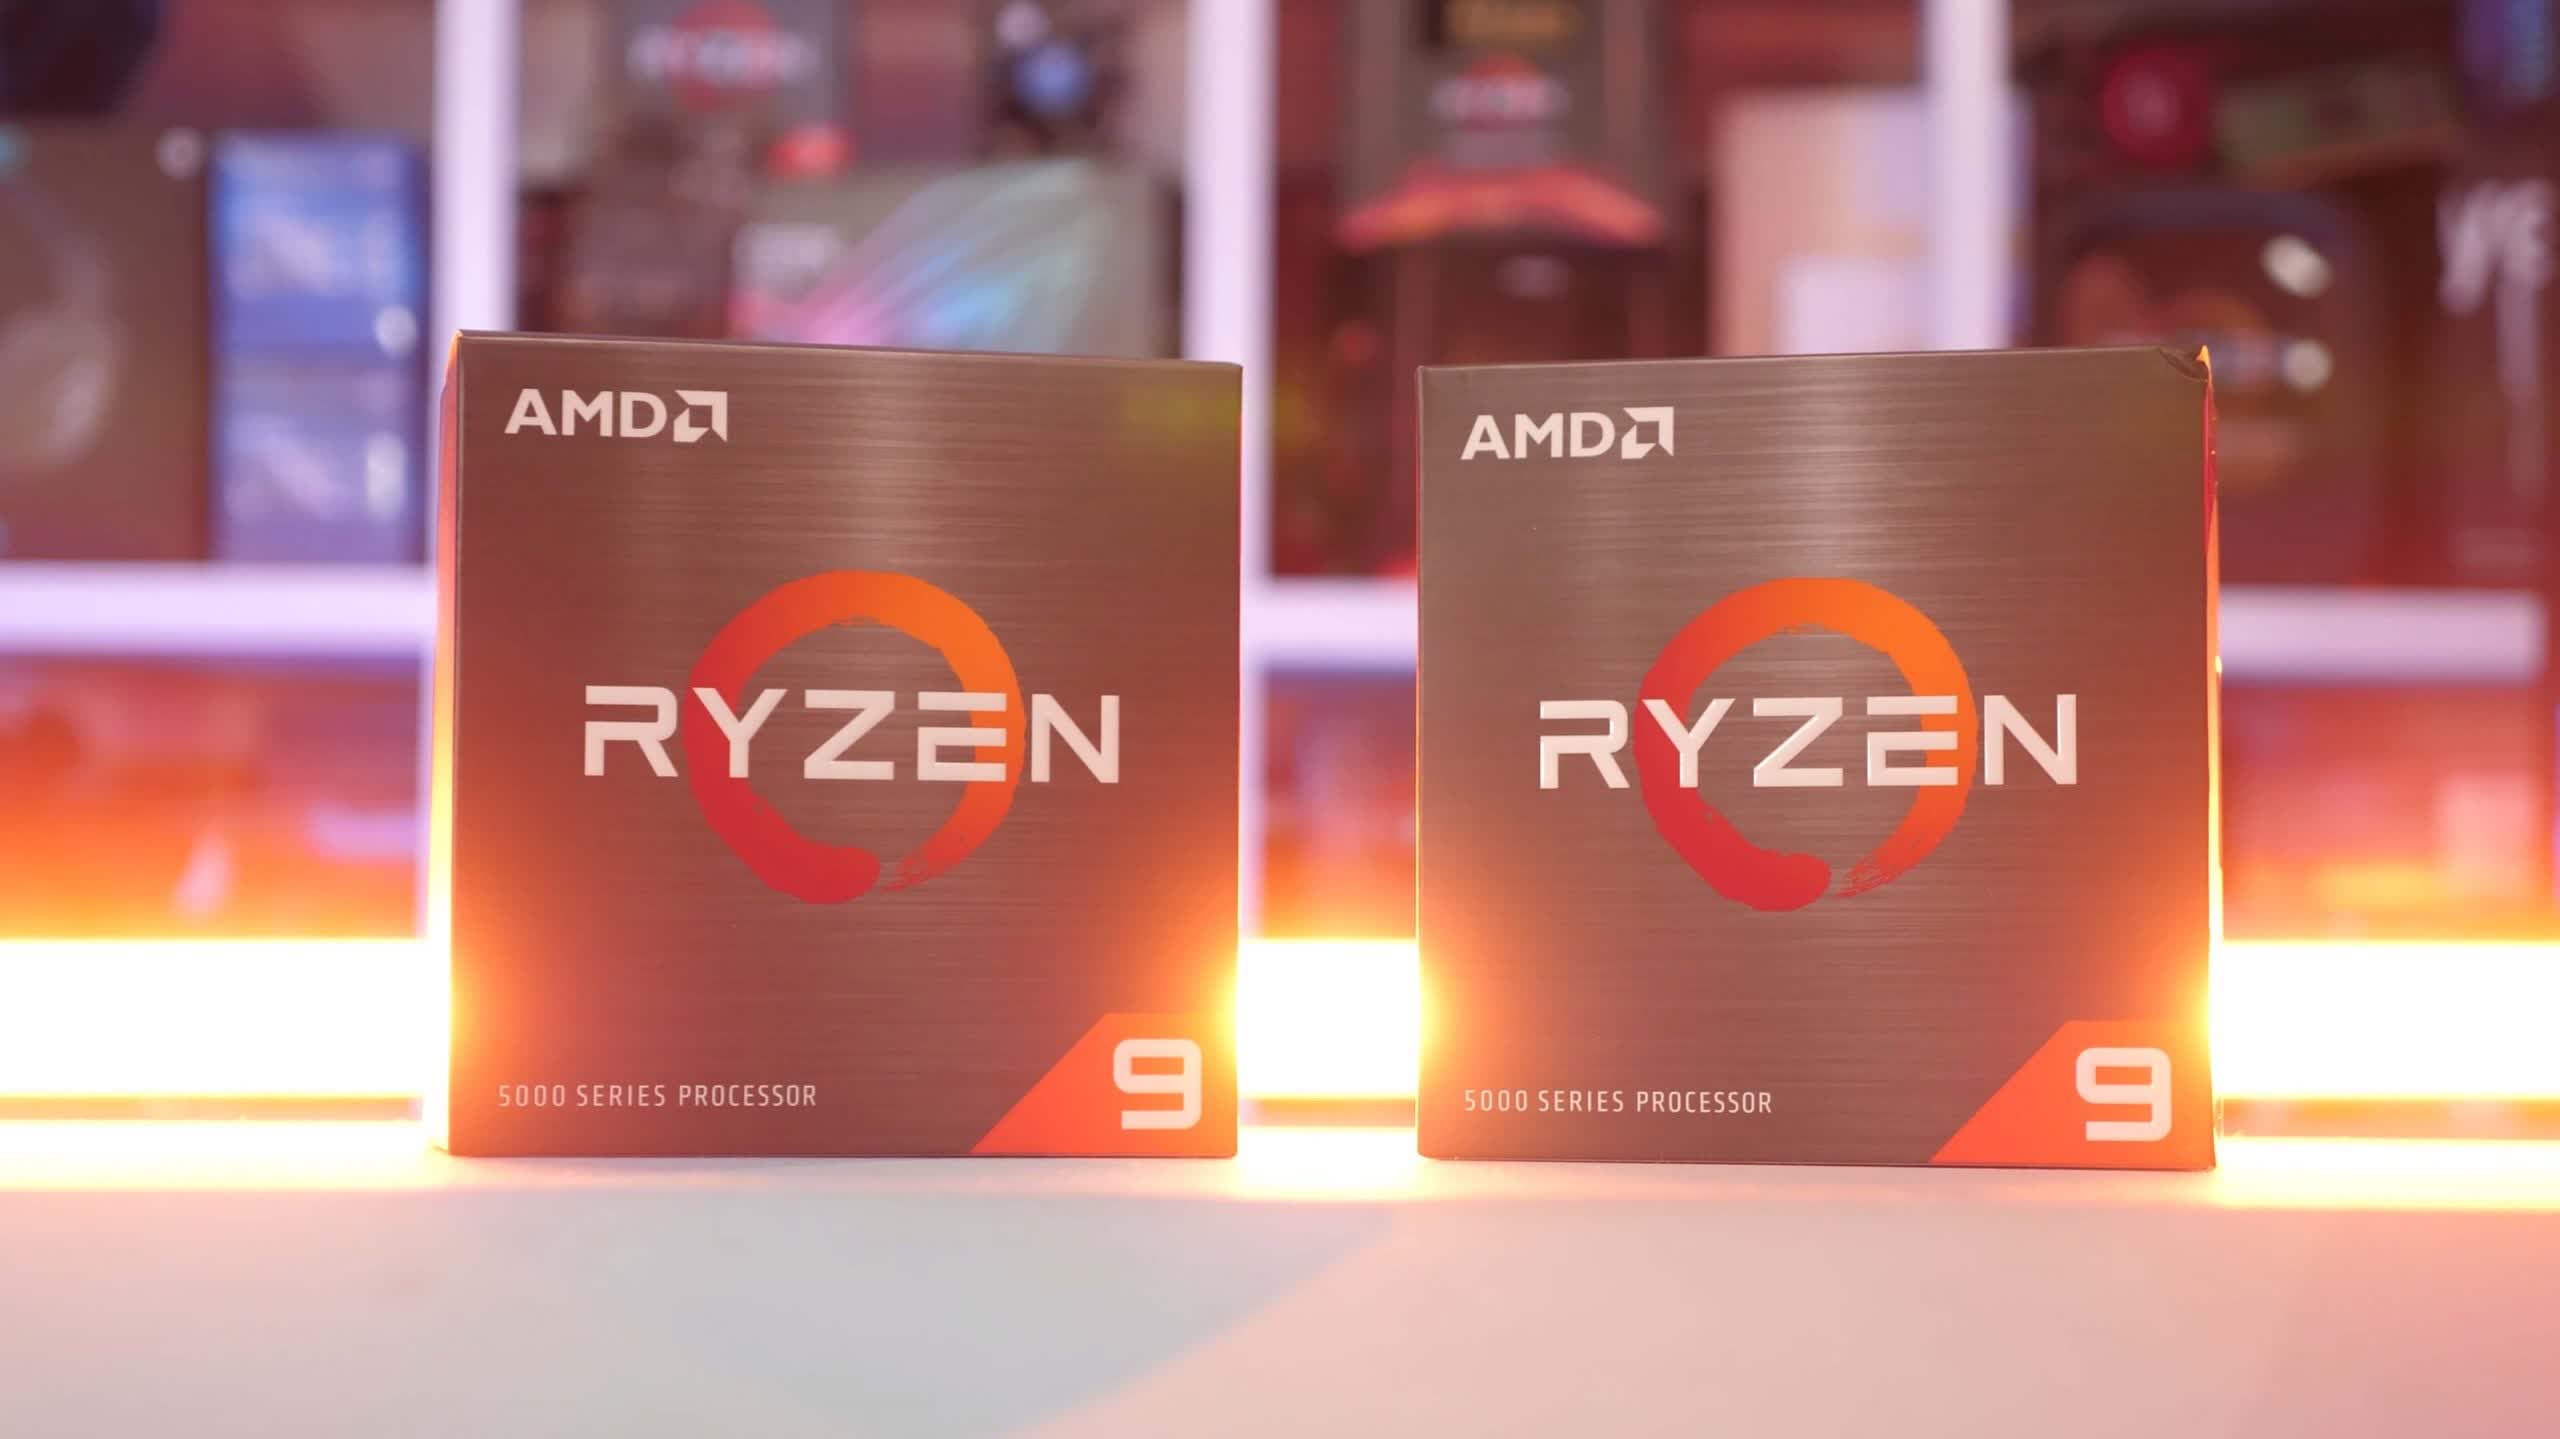 AMD Ryzen 5000 CPUs are back in stock at some European retailers